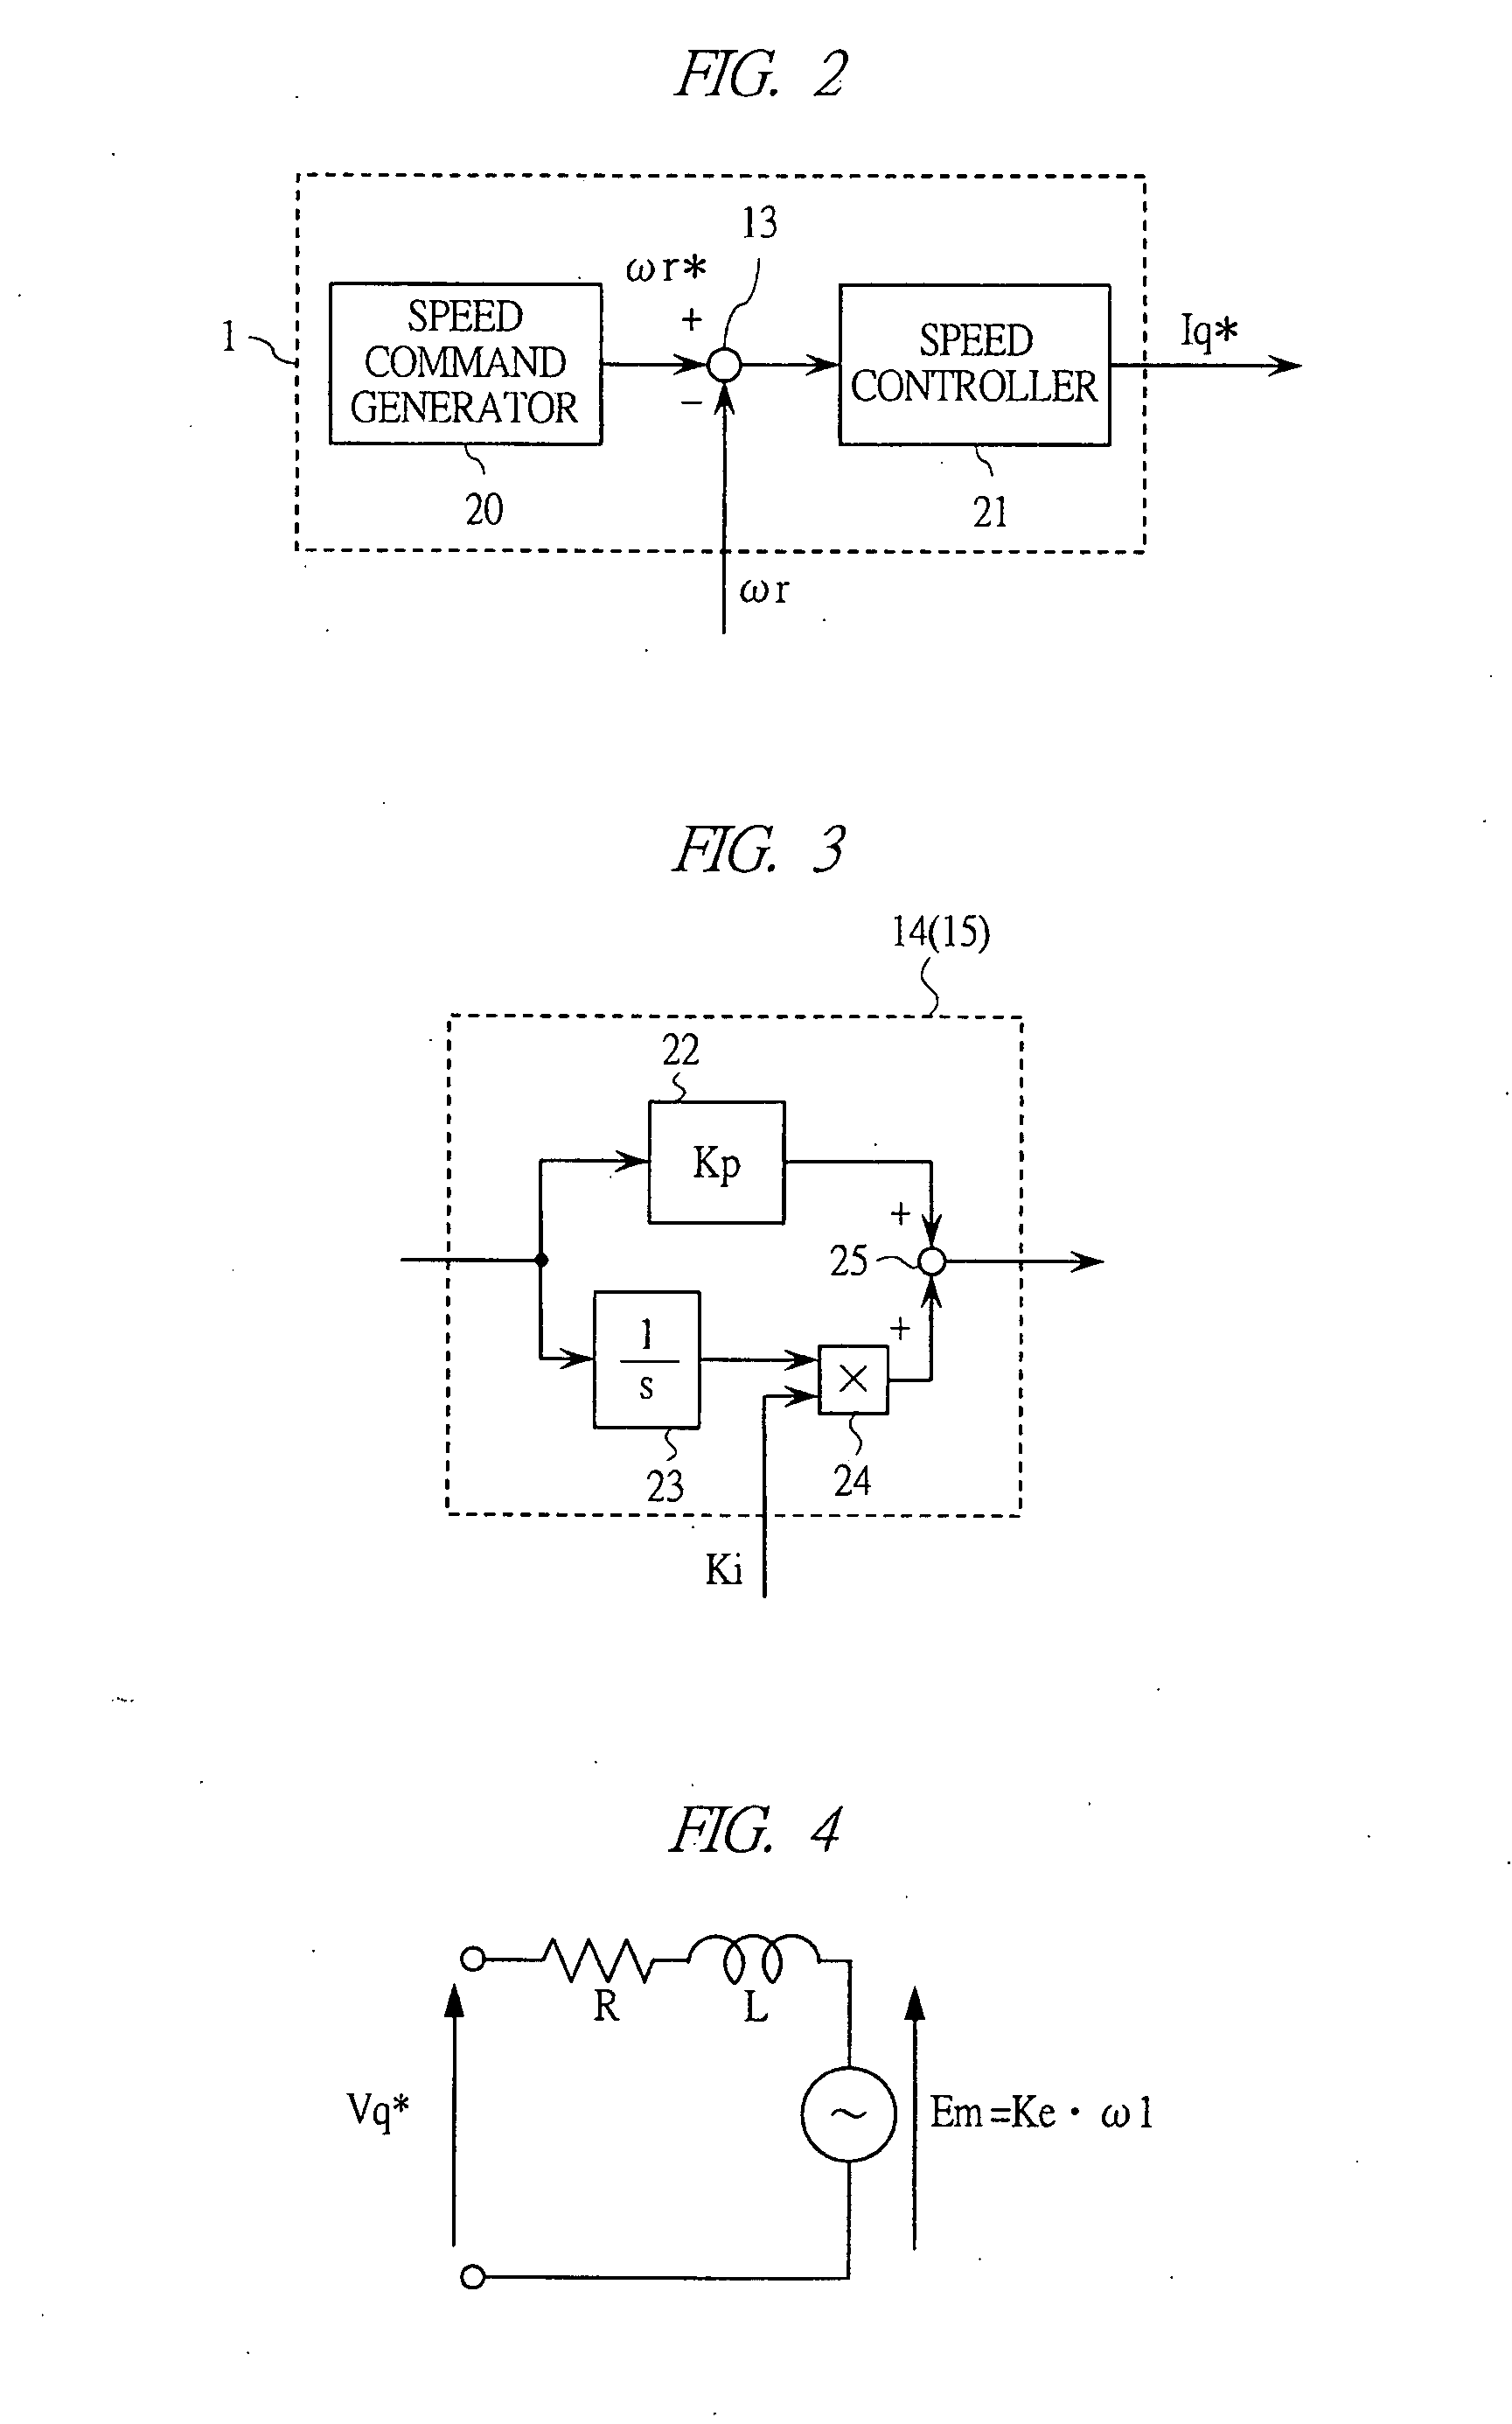 Control device for synchronous motor